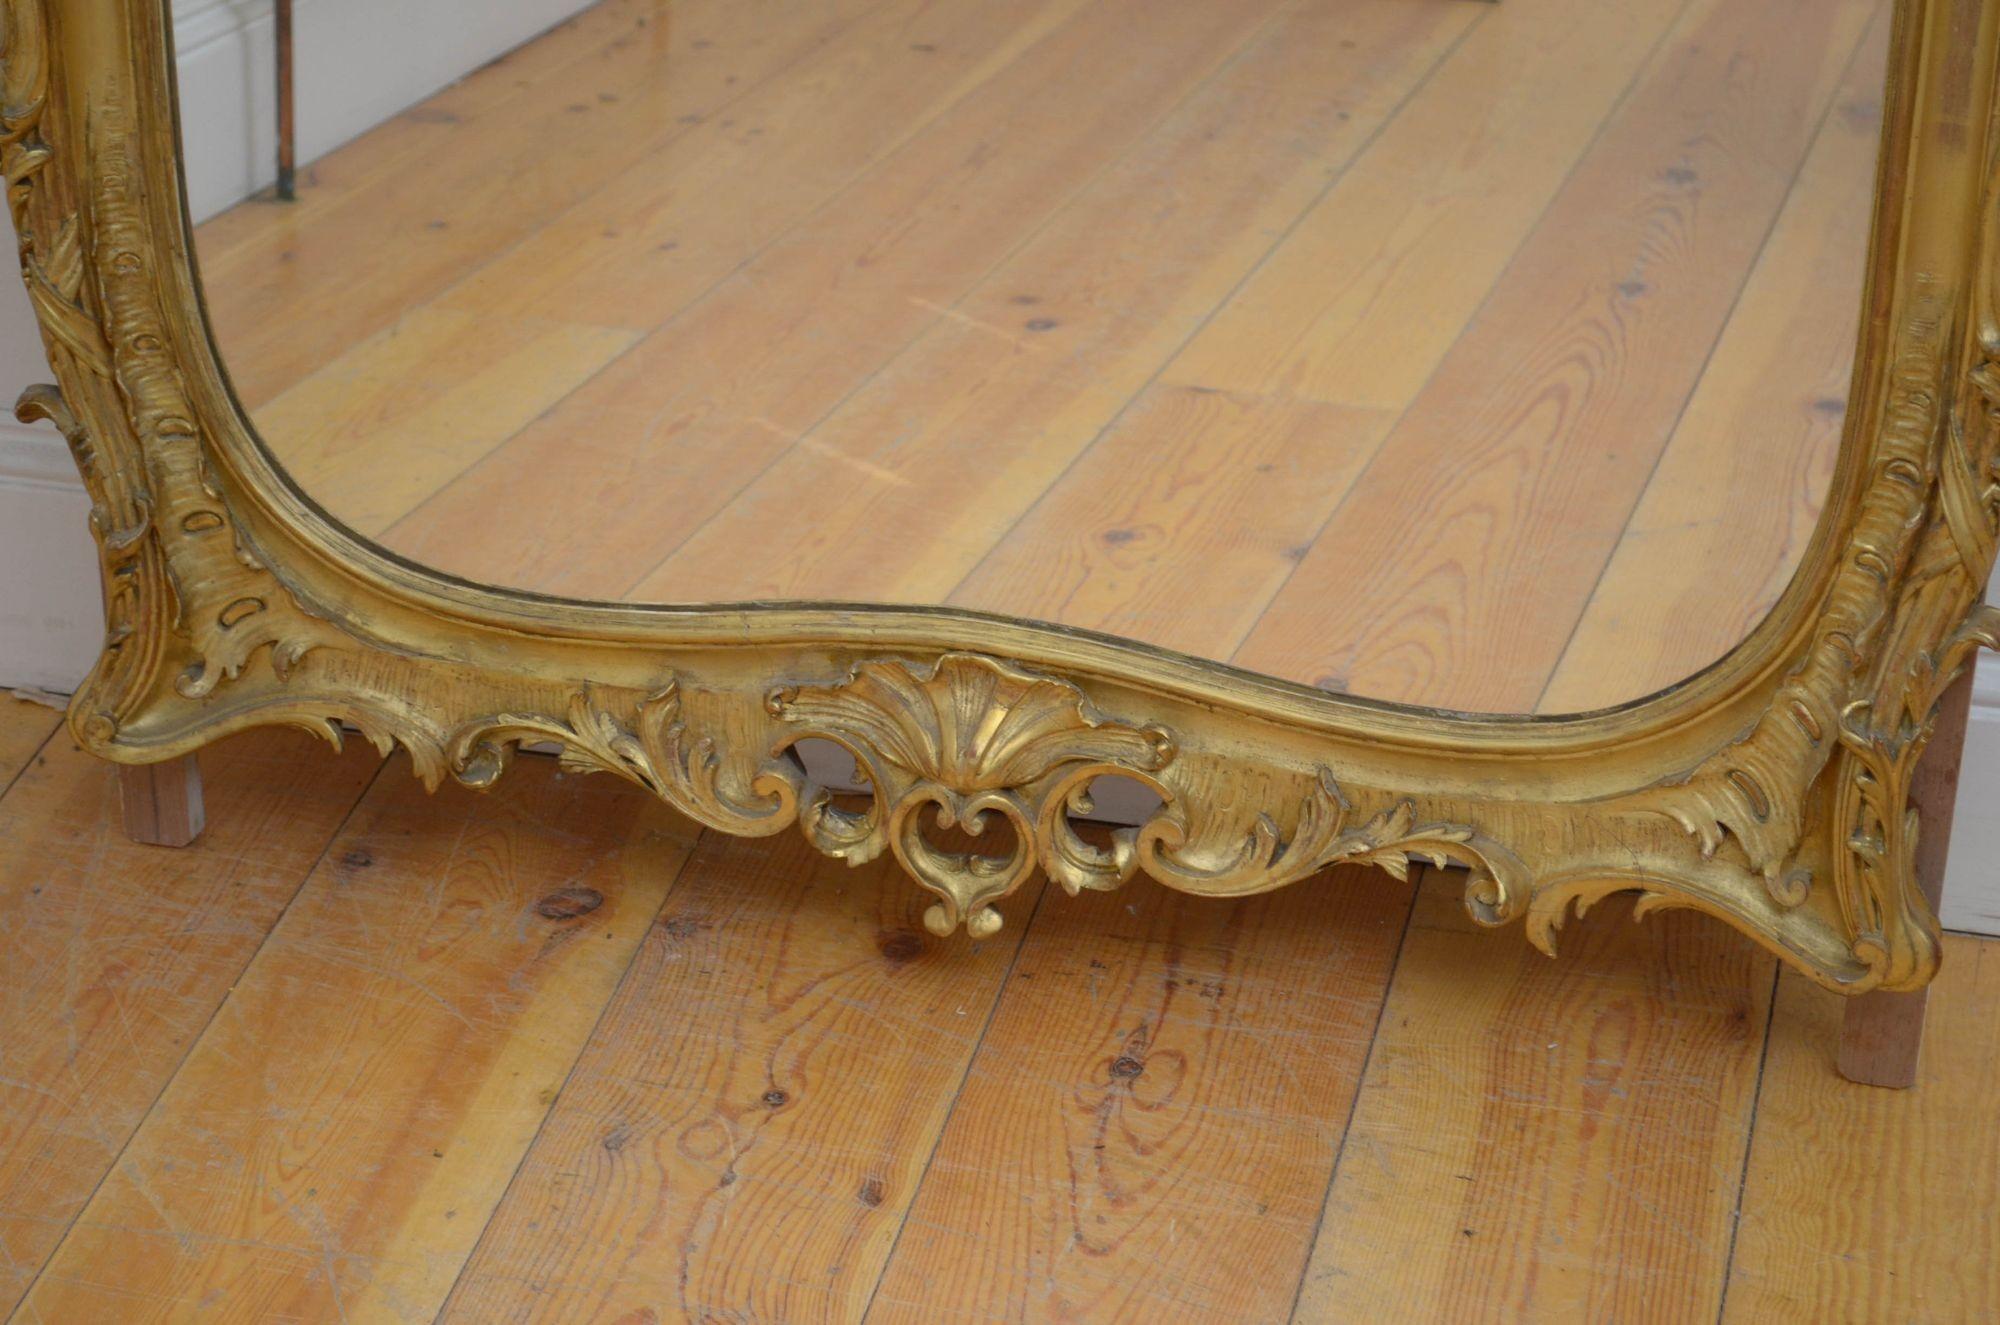 Sn5398 Exquisite 19th century giltwood wall mirror, having original glass with some imperfections in gilded frame decorated with cluster columns, bows leafy scrolls all with elaborate shell crest to the centre. This antique mirror is in home ready